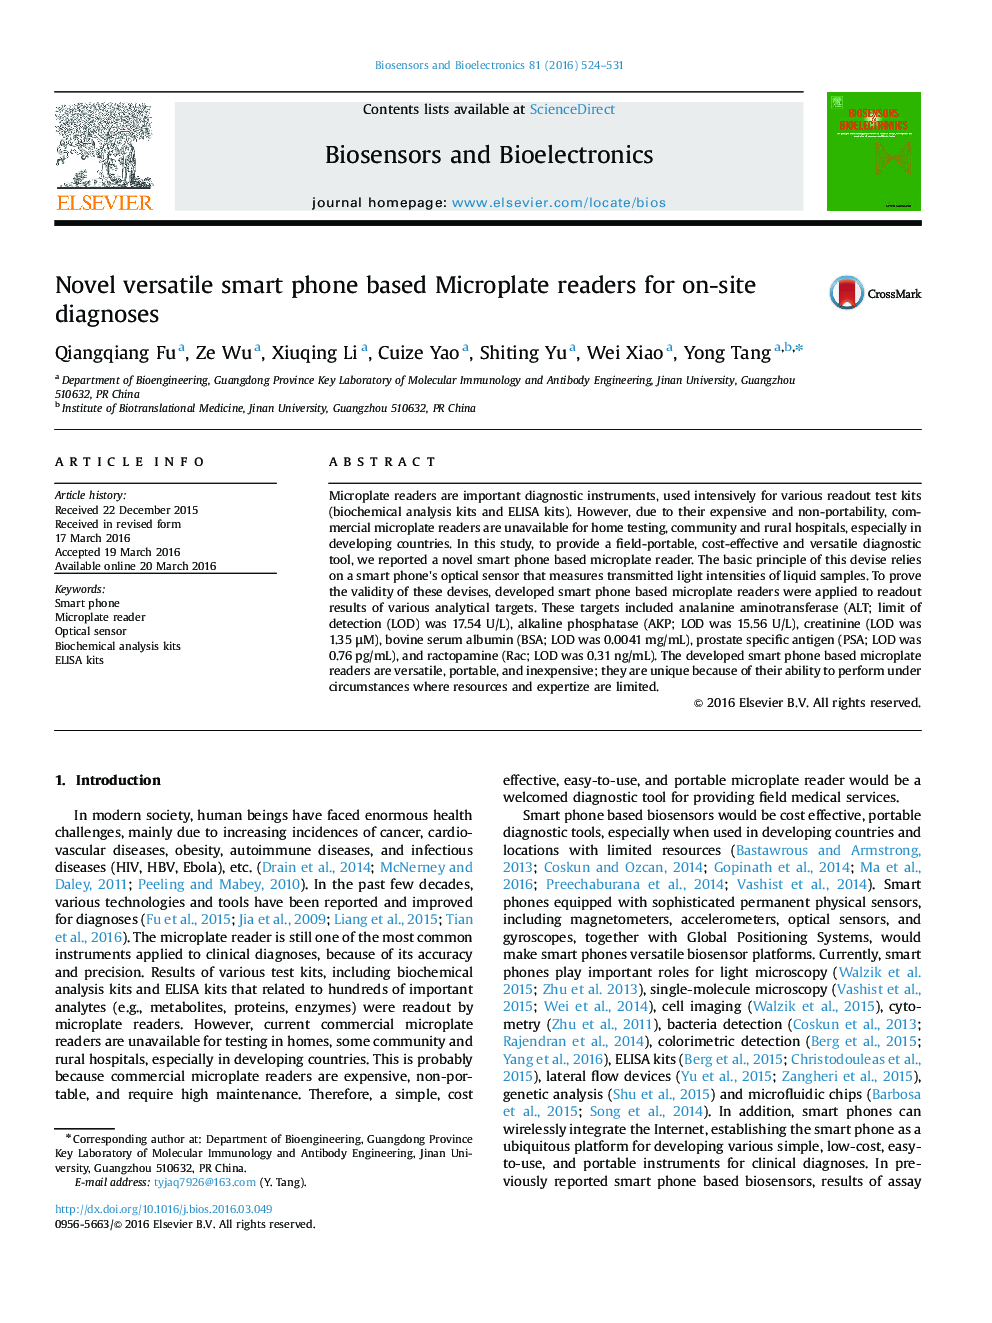 Novel versatile smart phone based Microplate readers for on-site diagnoses